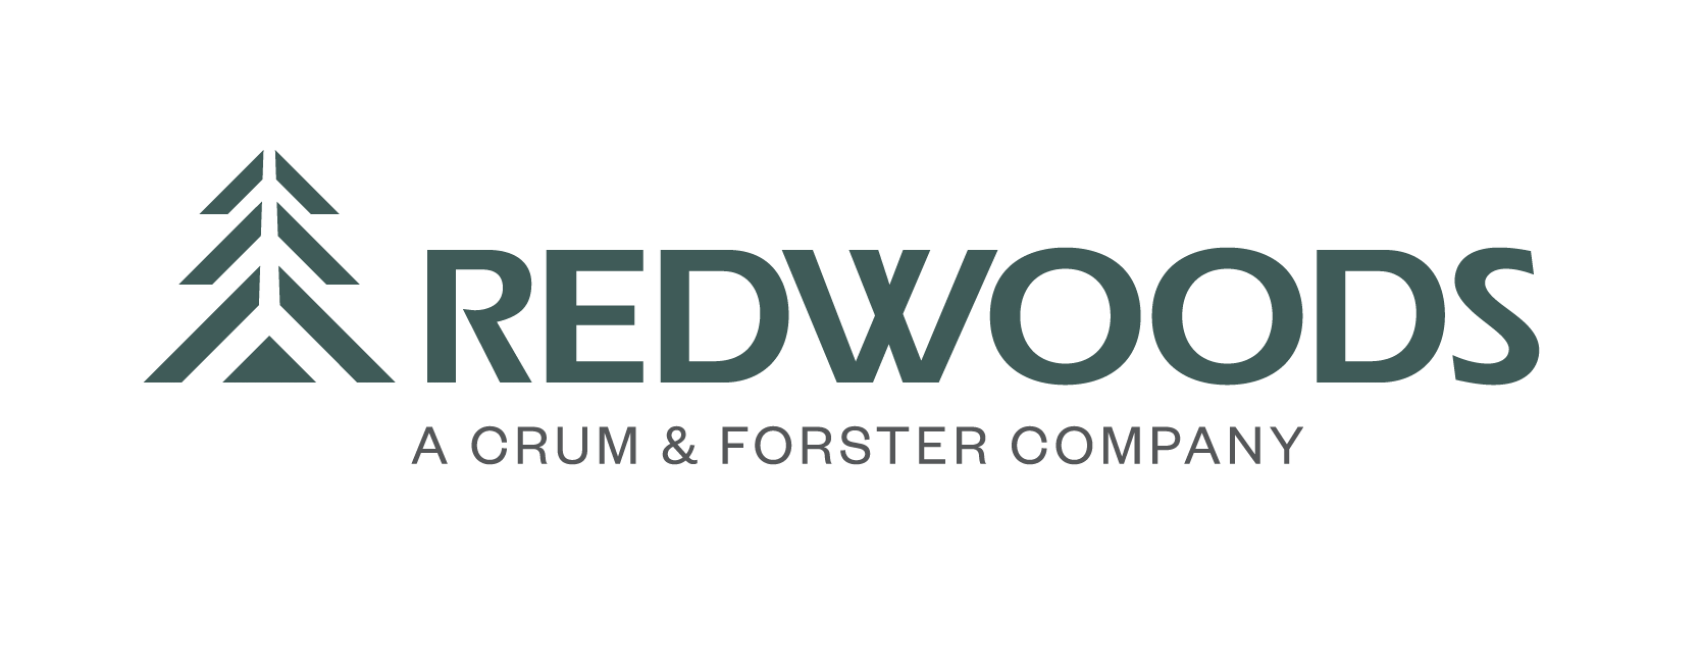 The Redwoods Group logo